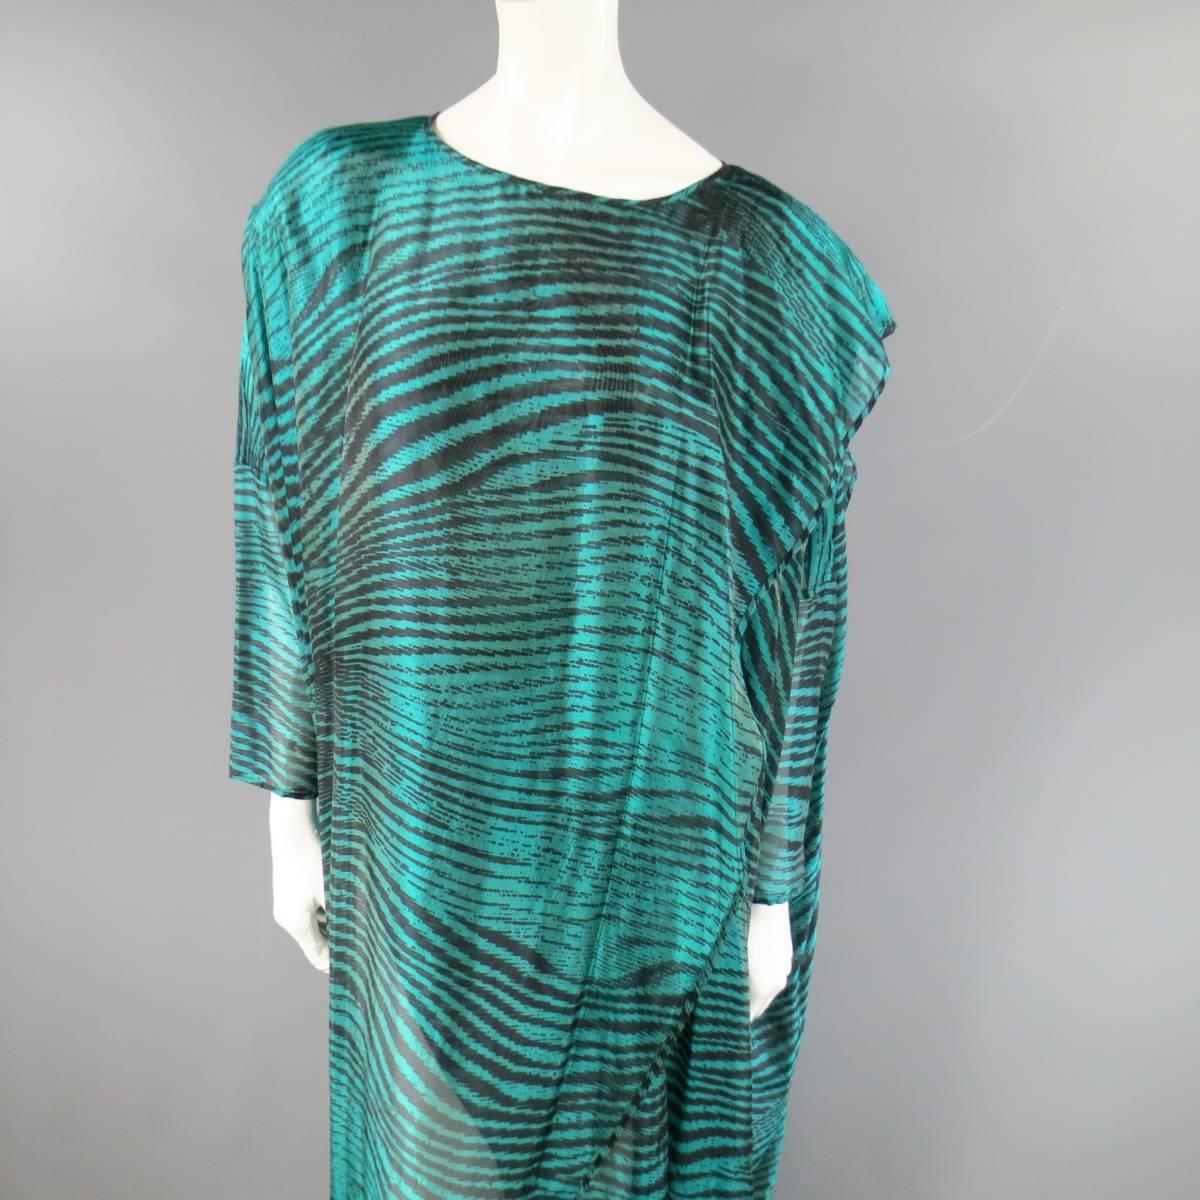 This fabulous vintage MISSONI for Bullock's caftan dress comes in a semi sheer teal green and black abstract zebra stripe print silk blend fabric and features a high scoop neck, 3/4 sleeves, and draped wrap overlay construction. Made in Italy.
